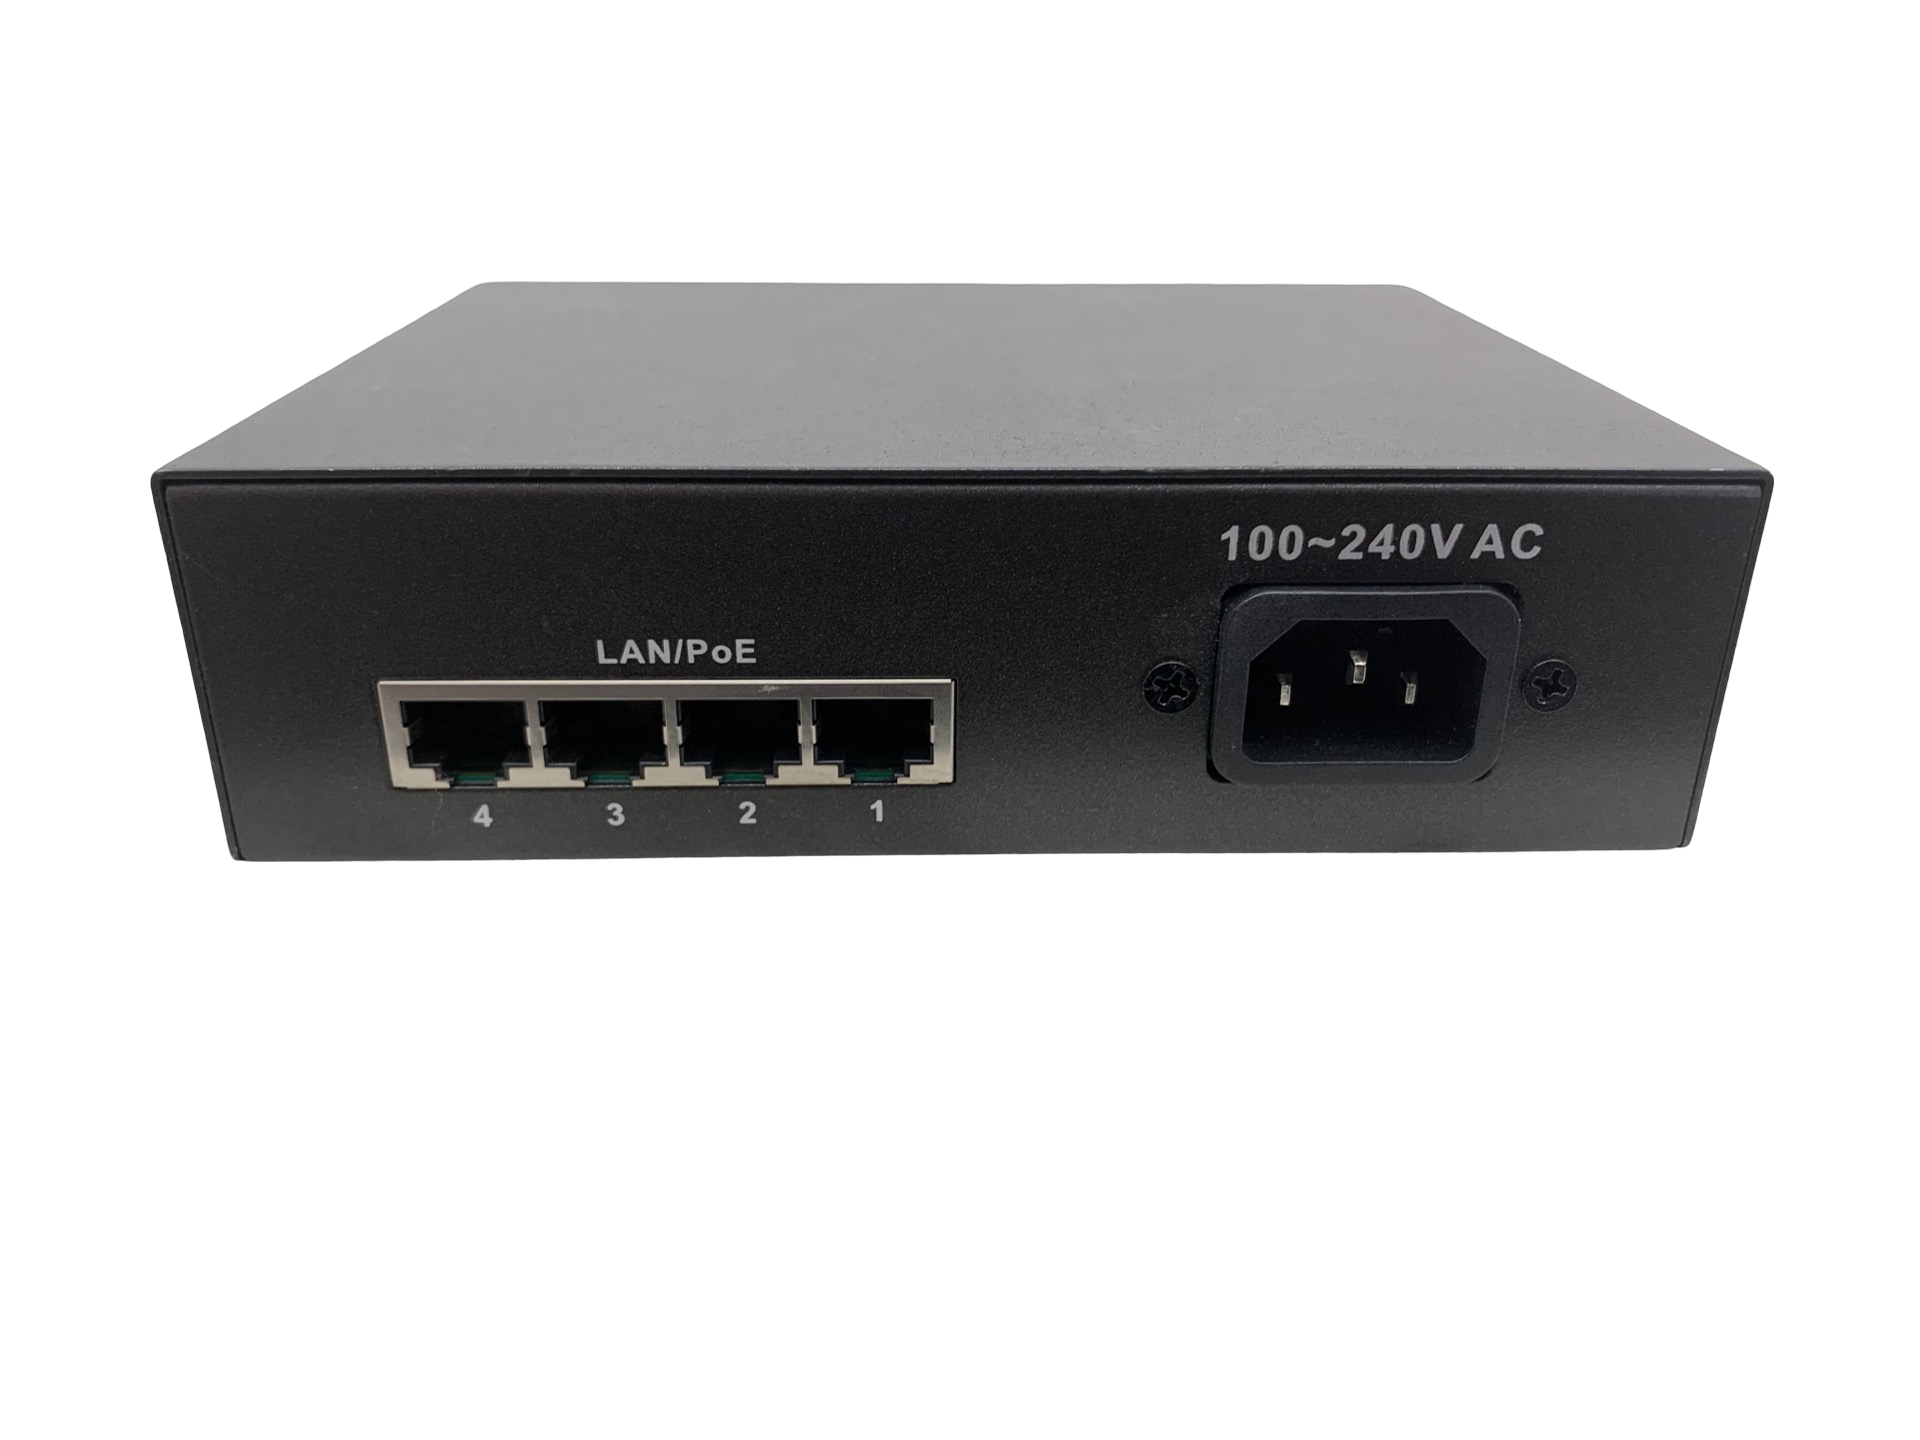 Switch Level One FEP-0511 5-port Fast Ethernet PoE+ 10/100